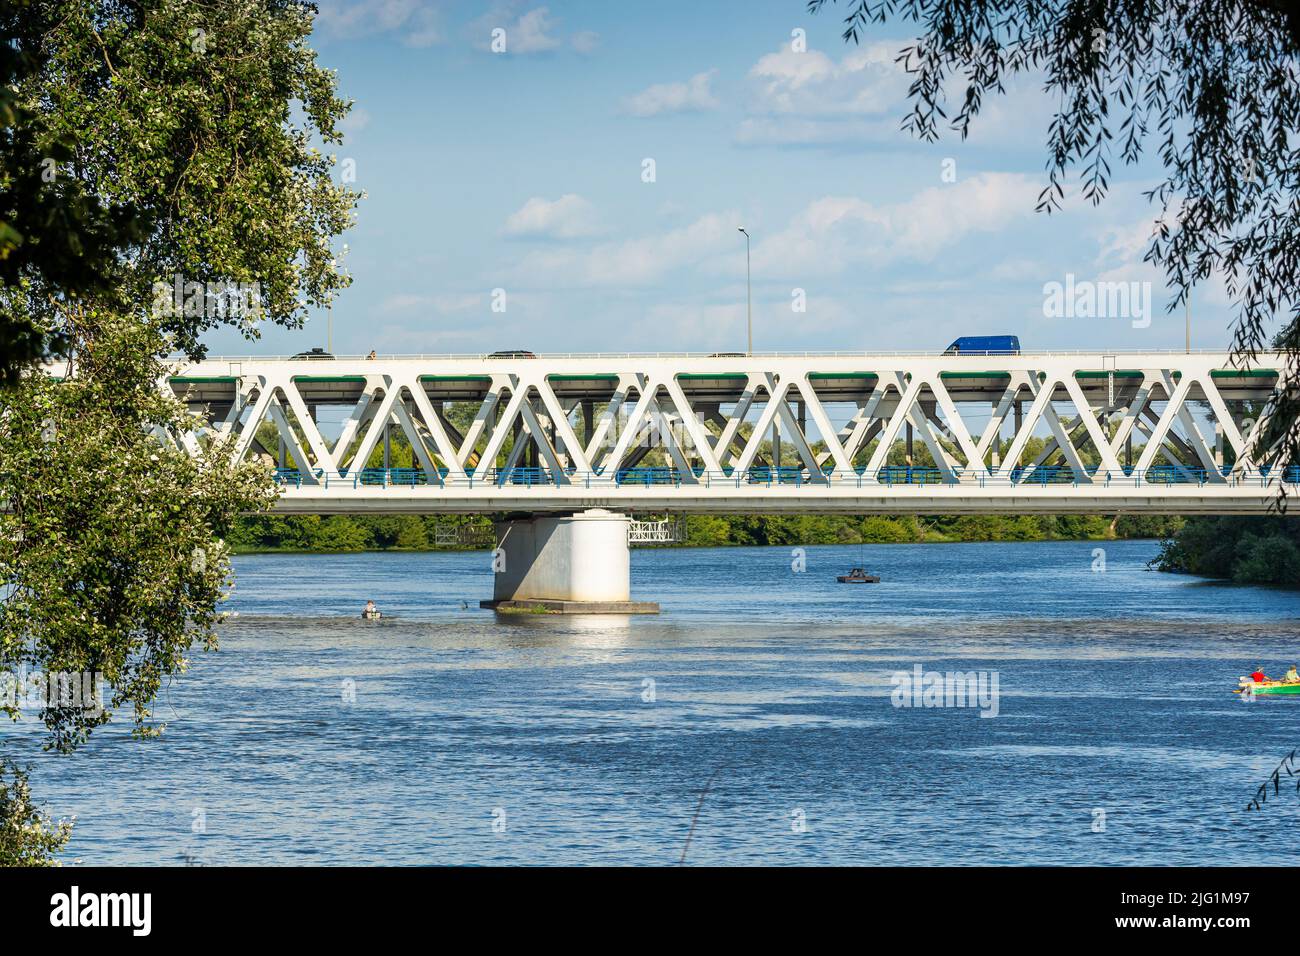 Nowy Dwor Mazowiecki, Poland - August 12, 2021. Most Pancera - Pancera Bridge over river Narew in Summer with railway for trains and road for cars Stock Photo